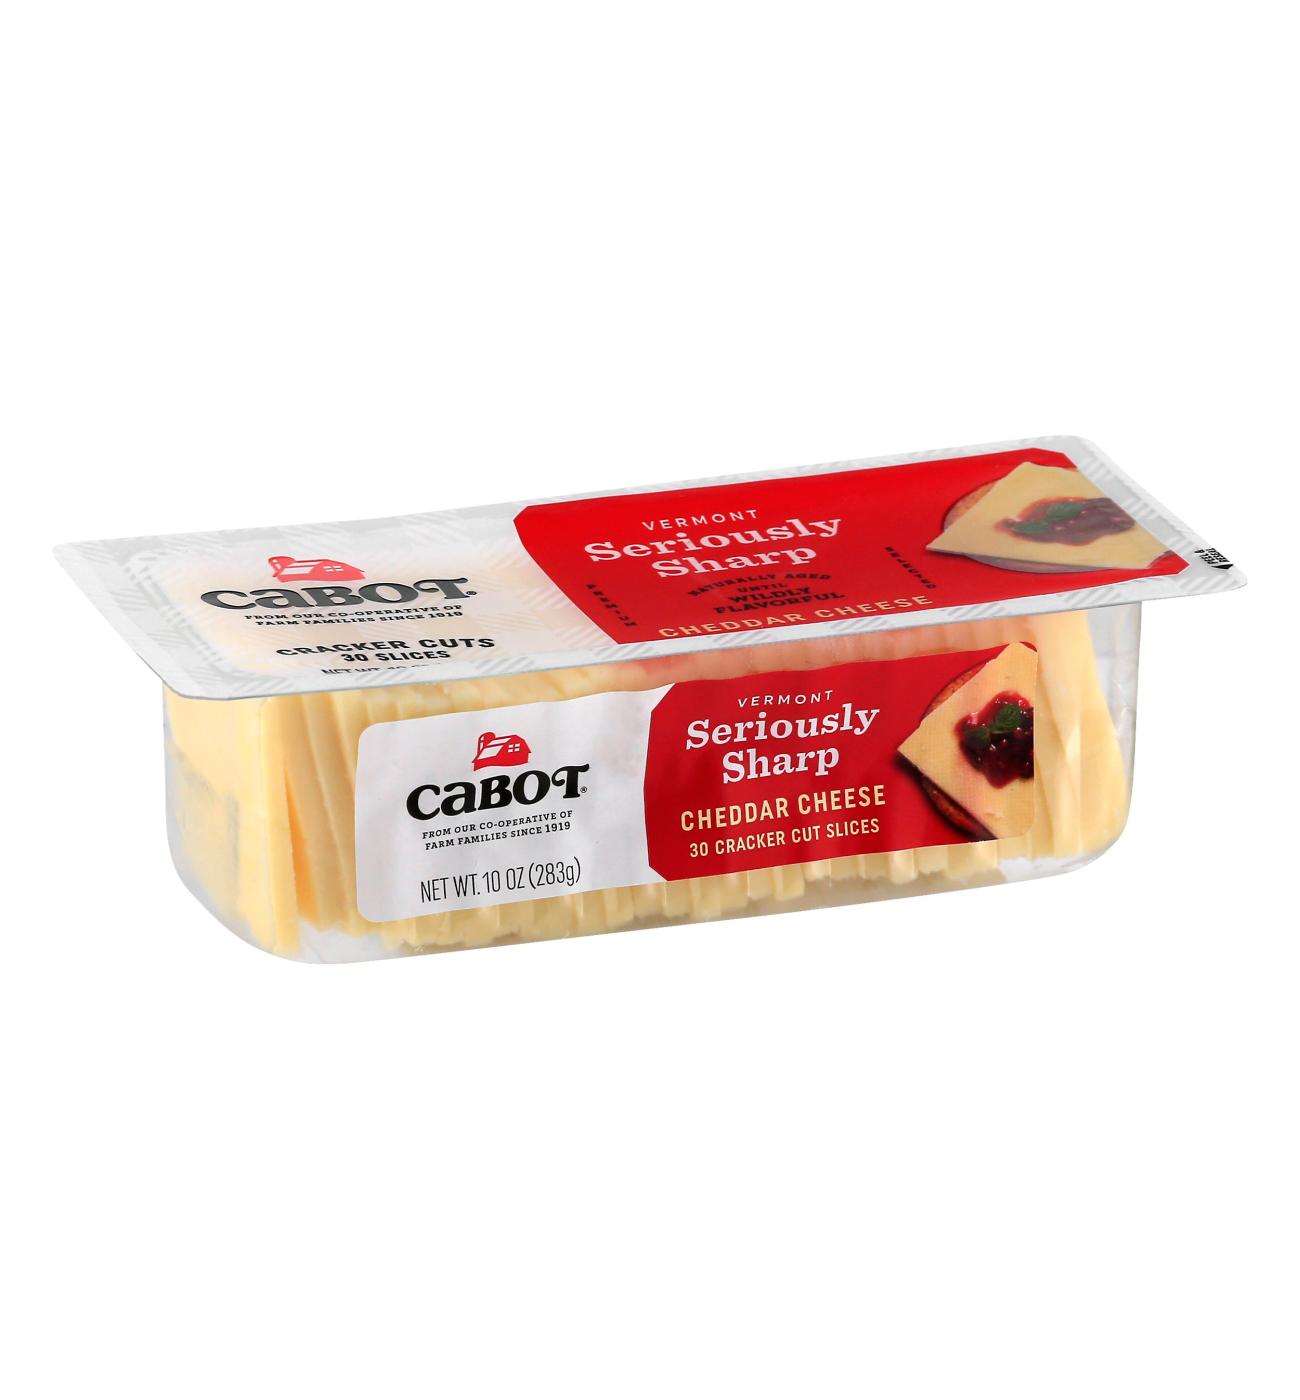 CABOT Vermont Seriously Sharp Cheddar Cracker Cut Cheese; image 2 of 2